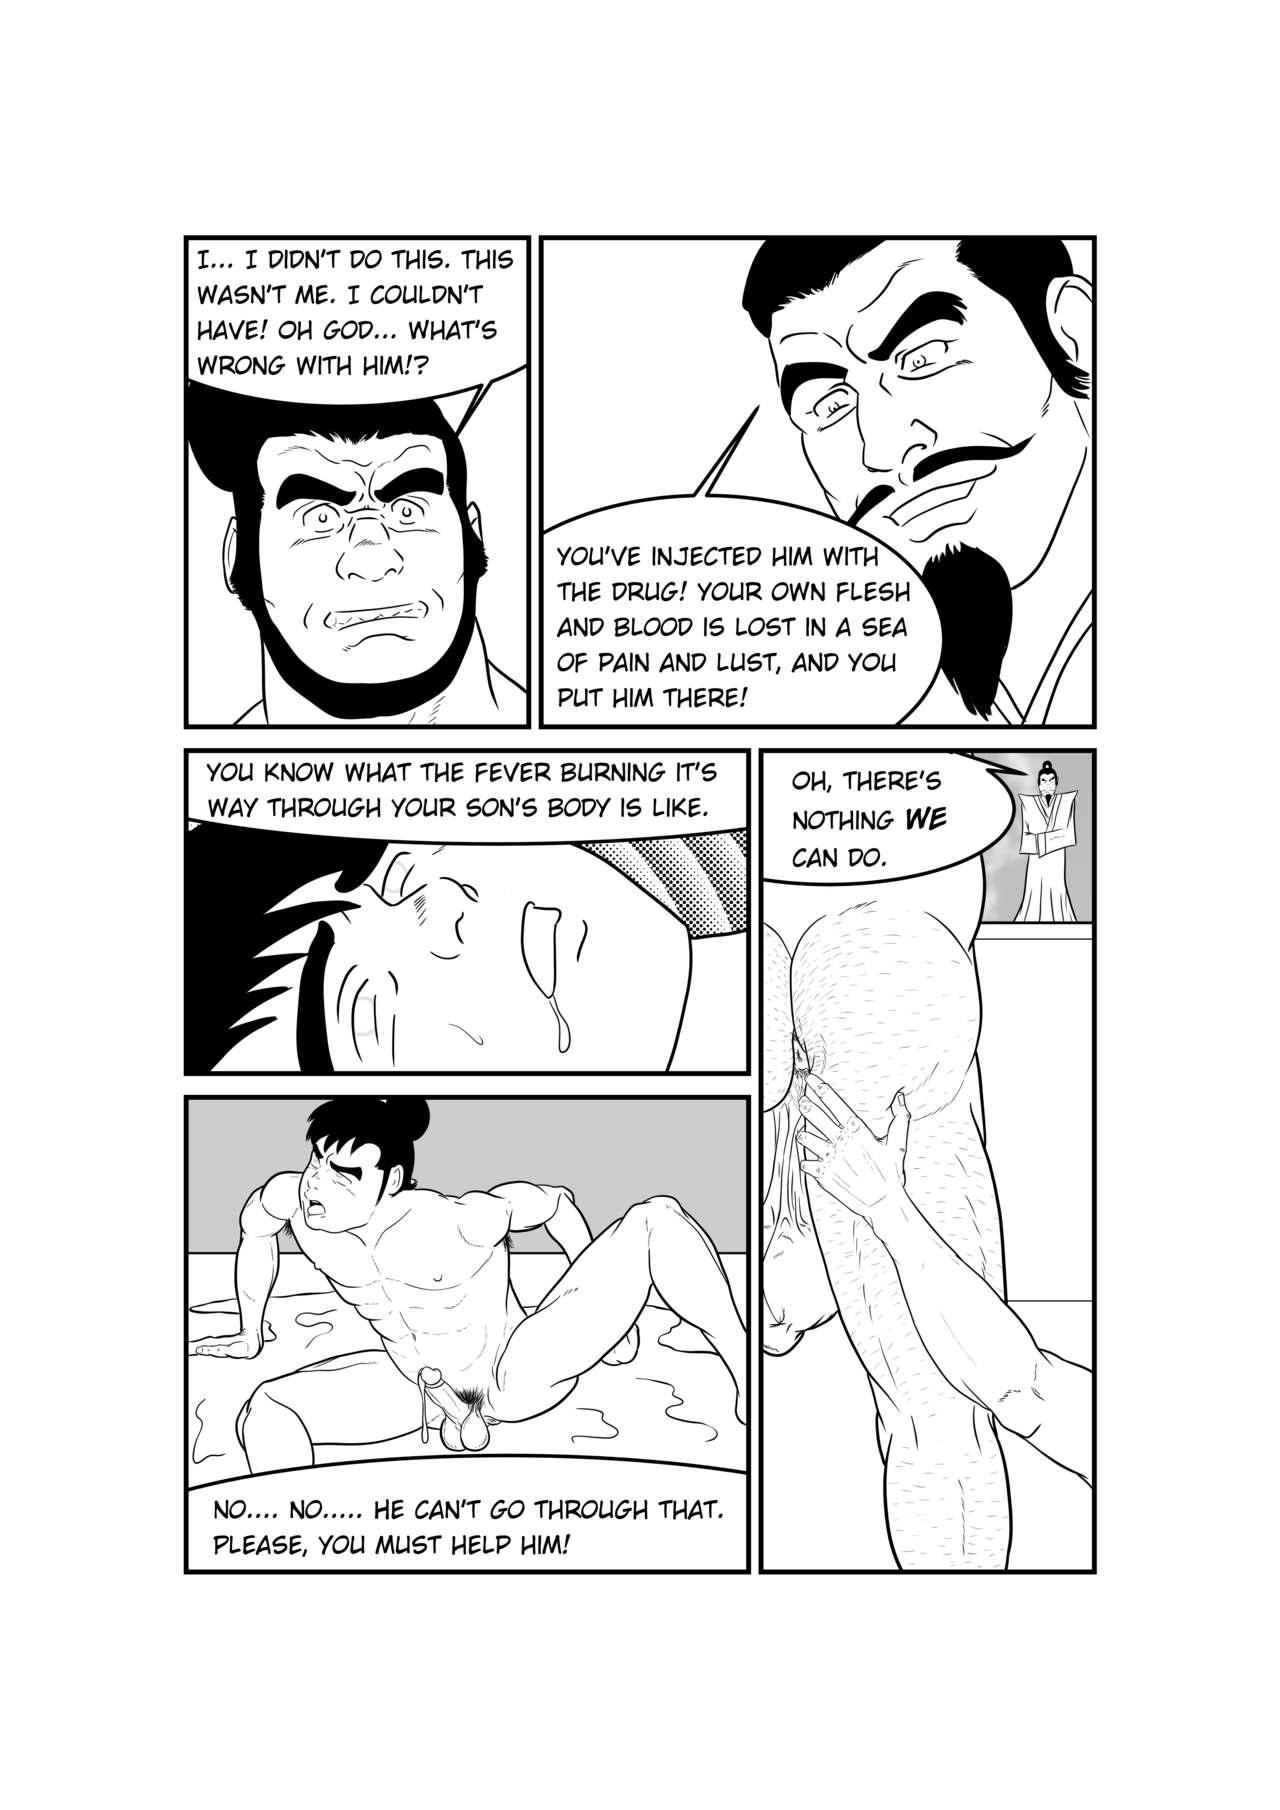 Cogiendo Father and Son in Hell - Unauthorized Fan Comic - Original Exotic - Page 23